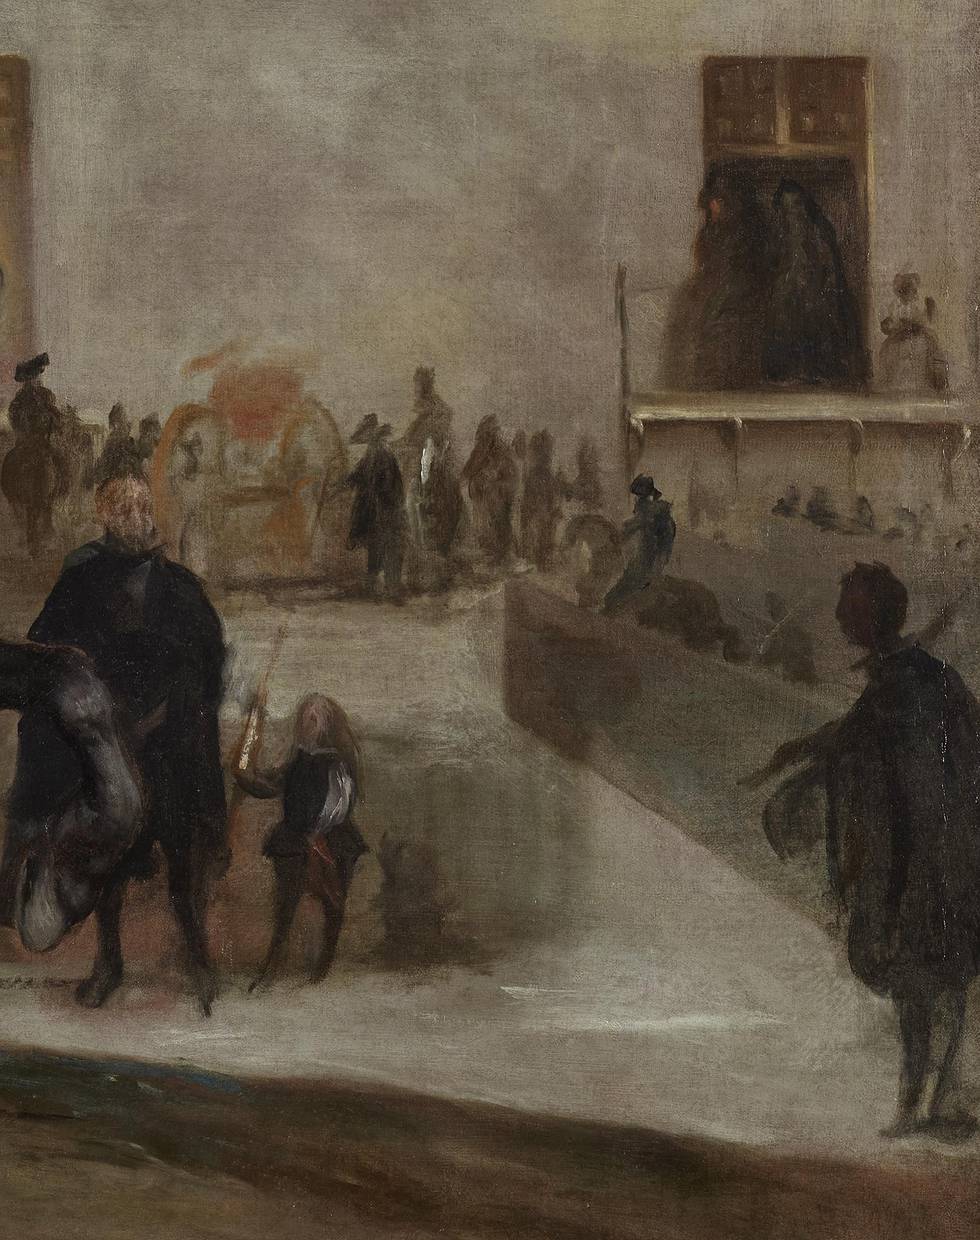 A detail of a painting of a young boy riding a horse outside a building